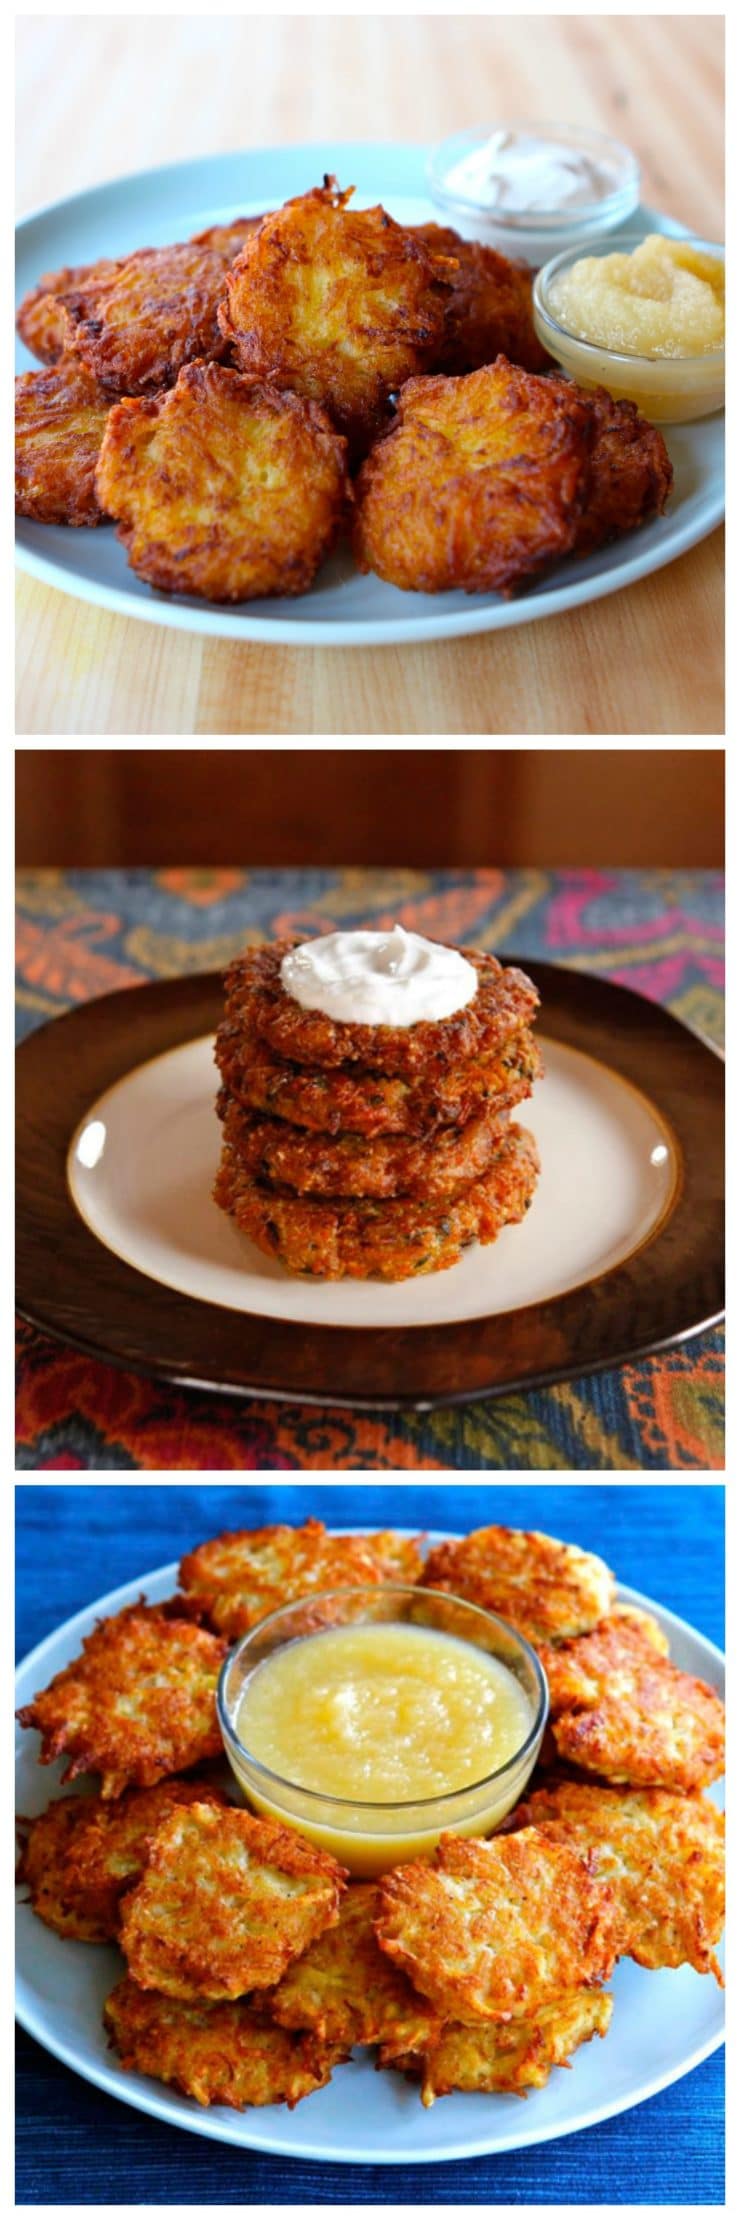 How to Make Perfect Crispy Latkes Every Time - Helpful Tips and Recipes for the Hanukkah Holiday on ToriAvey.com!